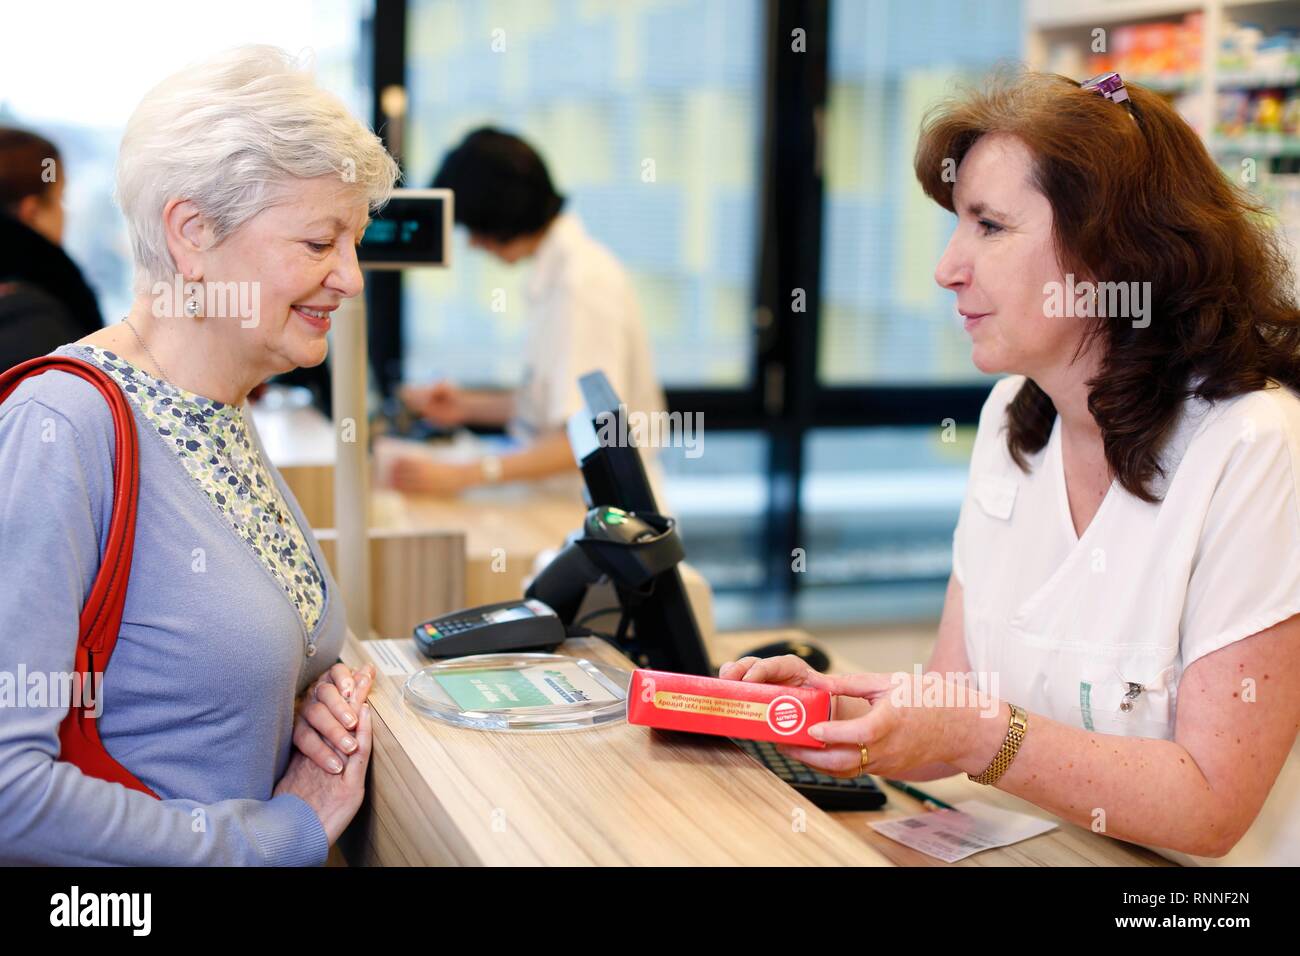 Customer is advised by pharmacist about medication in pharmacy, Czech Republic Stock Photo